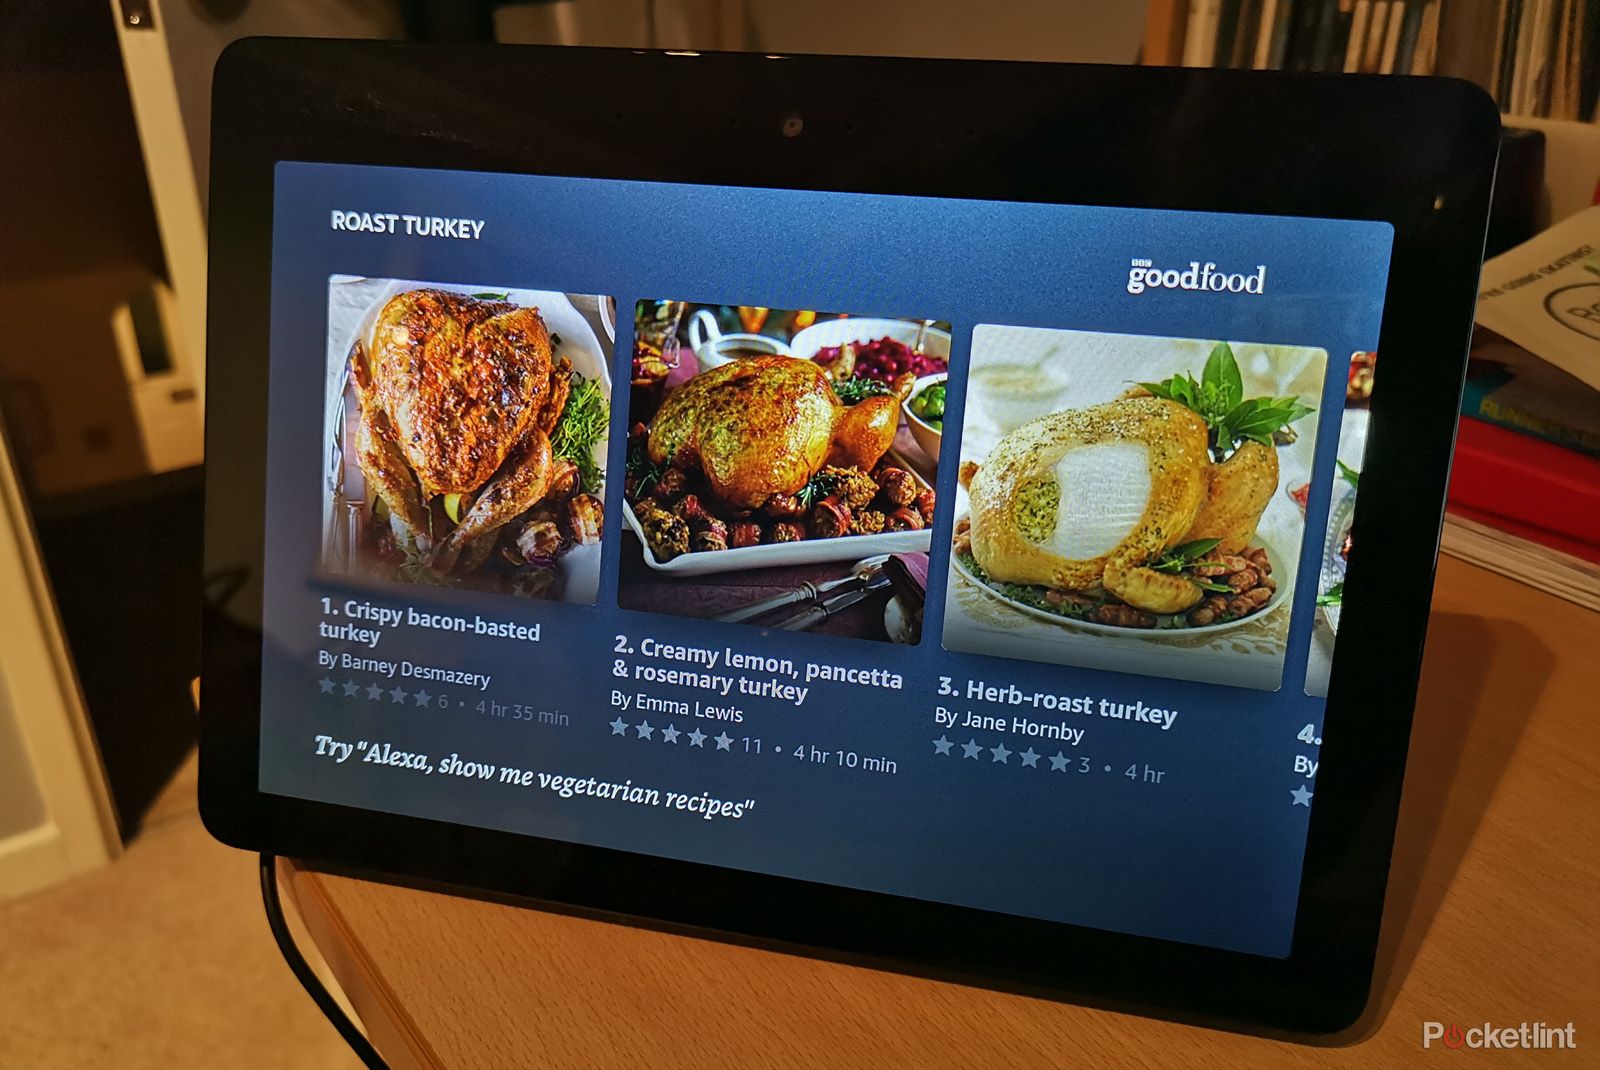 The Amazon Echo Show now gets you step-by-step recipes from BBC Good Food image 1